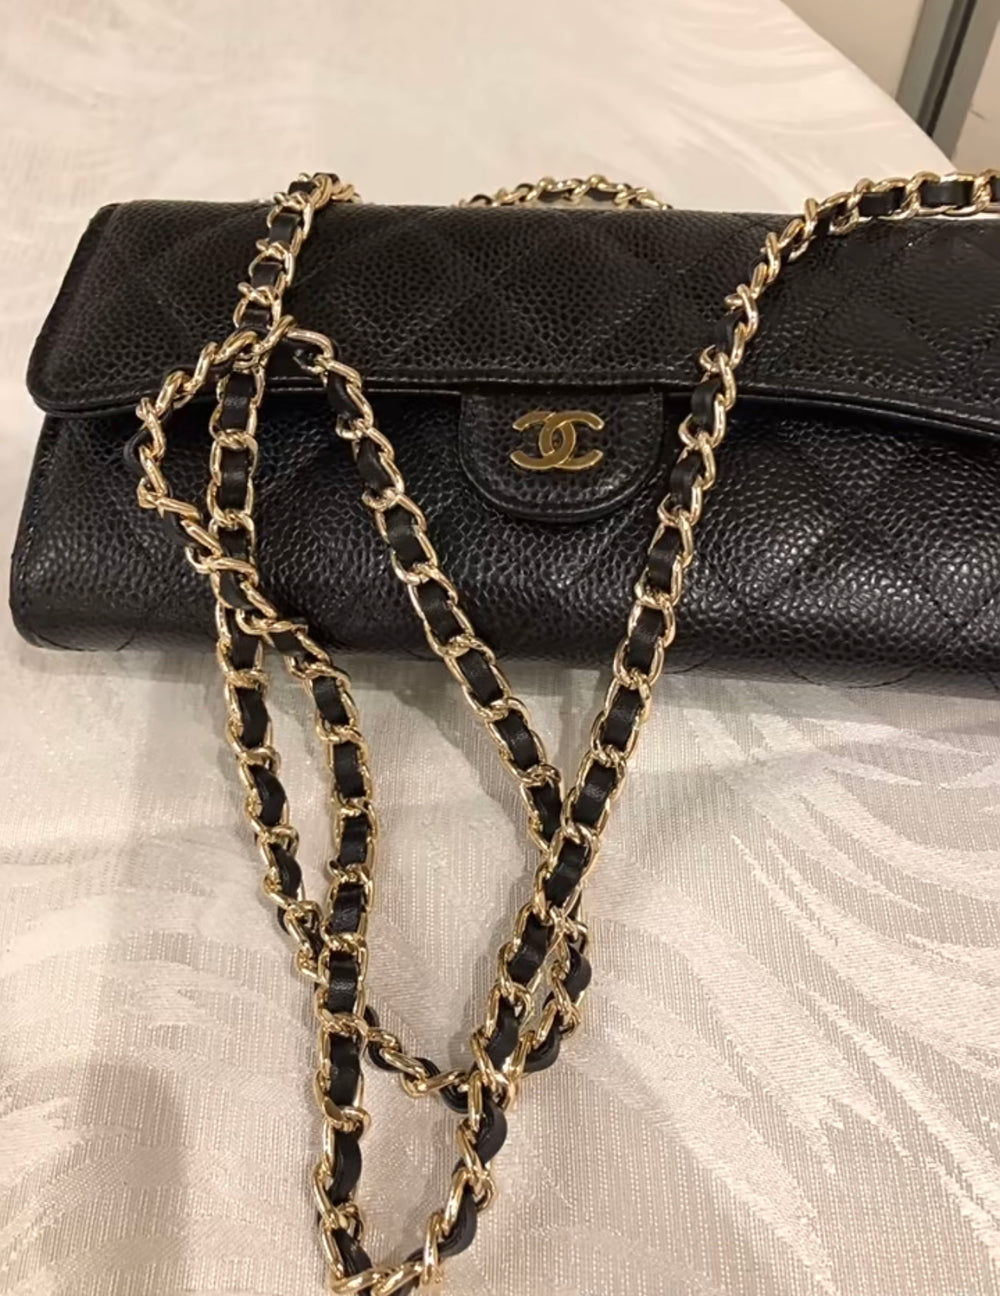 Alessia E. review of Converter Kit for Chanel Long Wallet